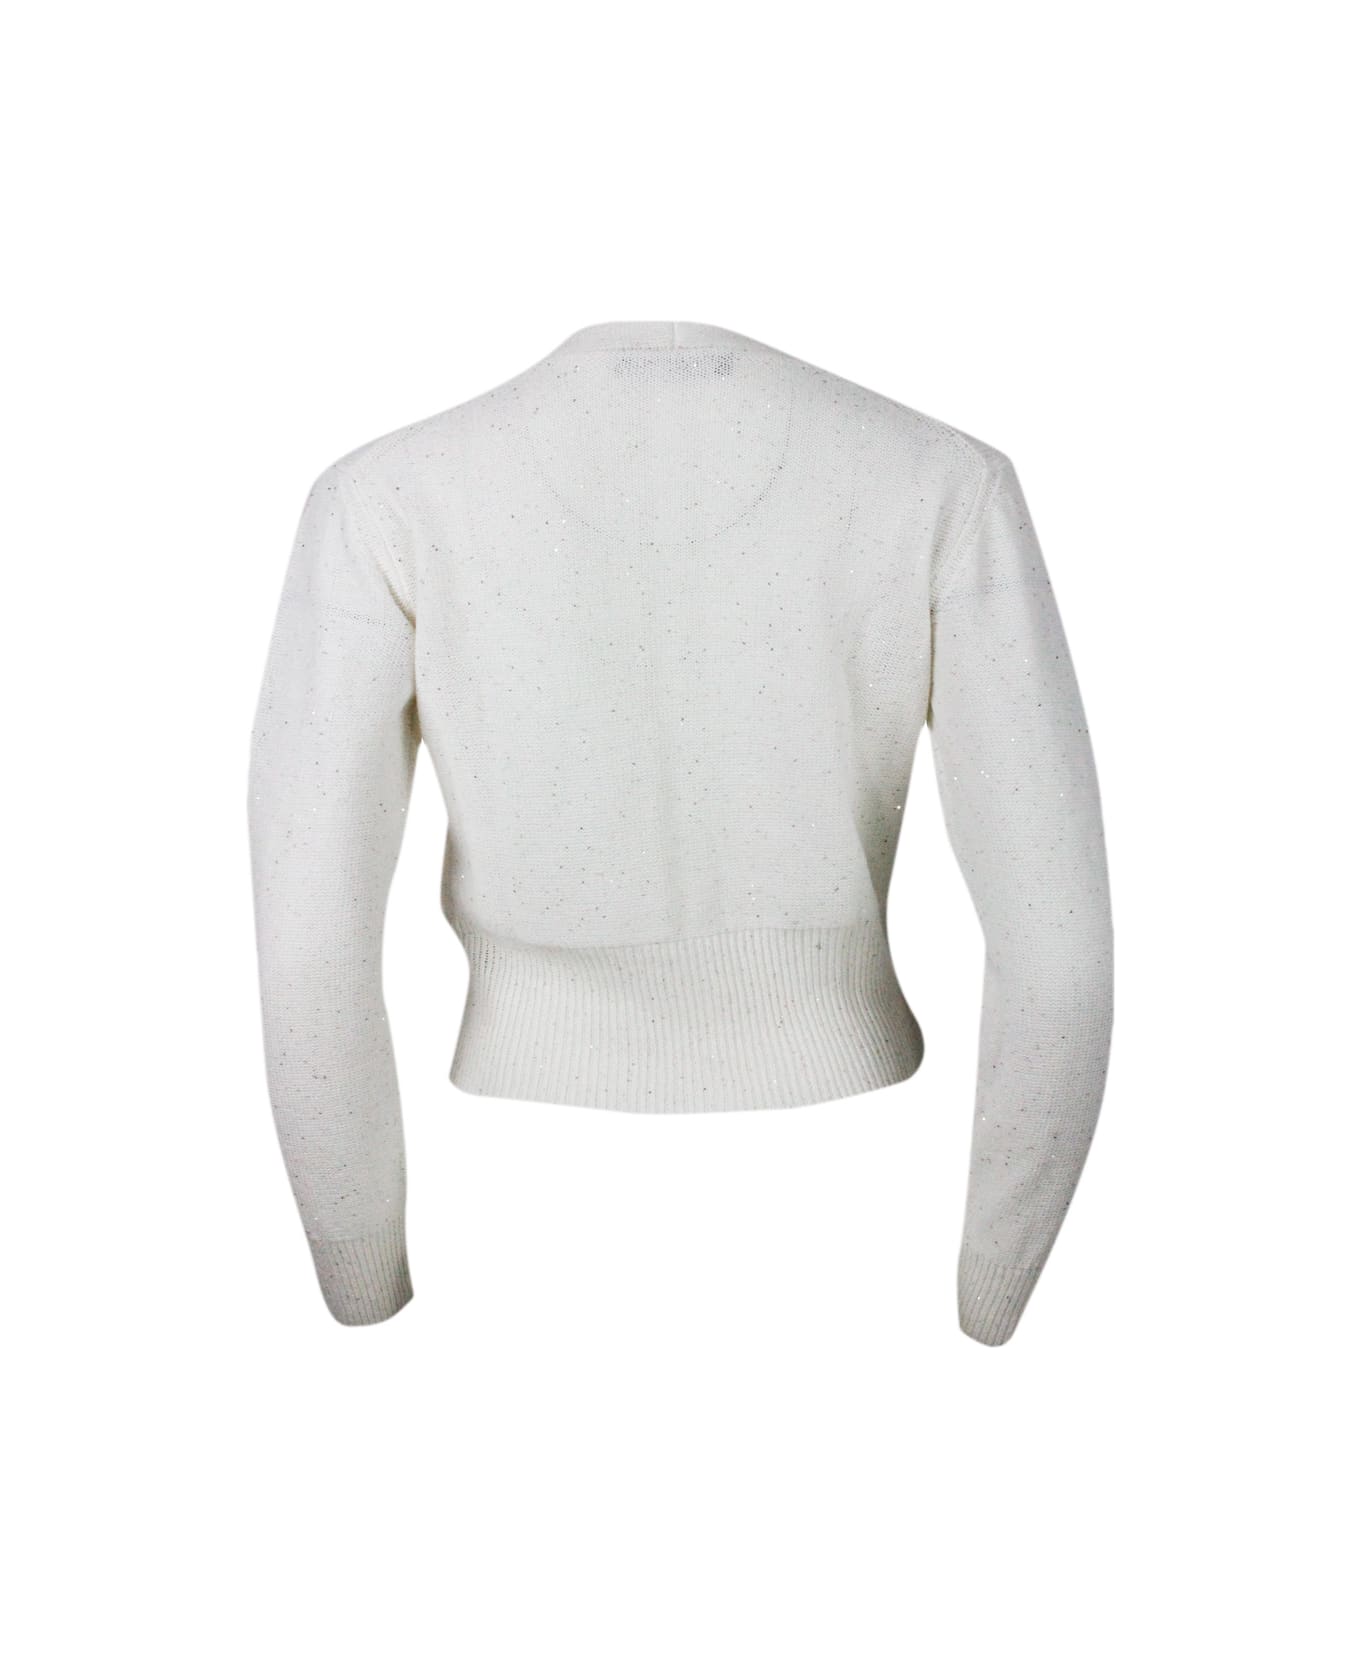 Fabiana Filippi Cardigan Sweater With Button Closure Embellished With Brilliant Applied Microsequins - cream